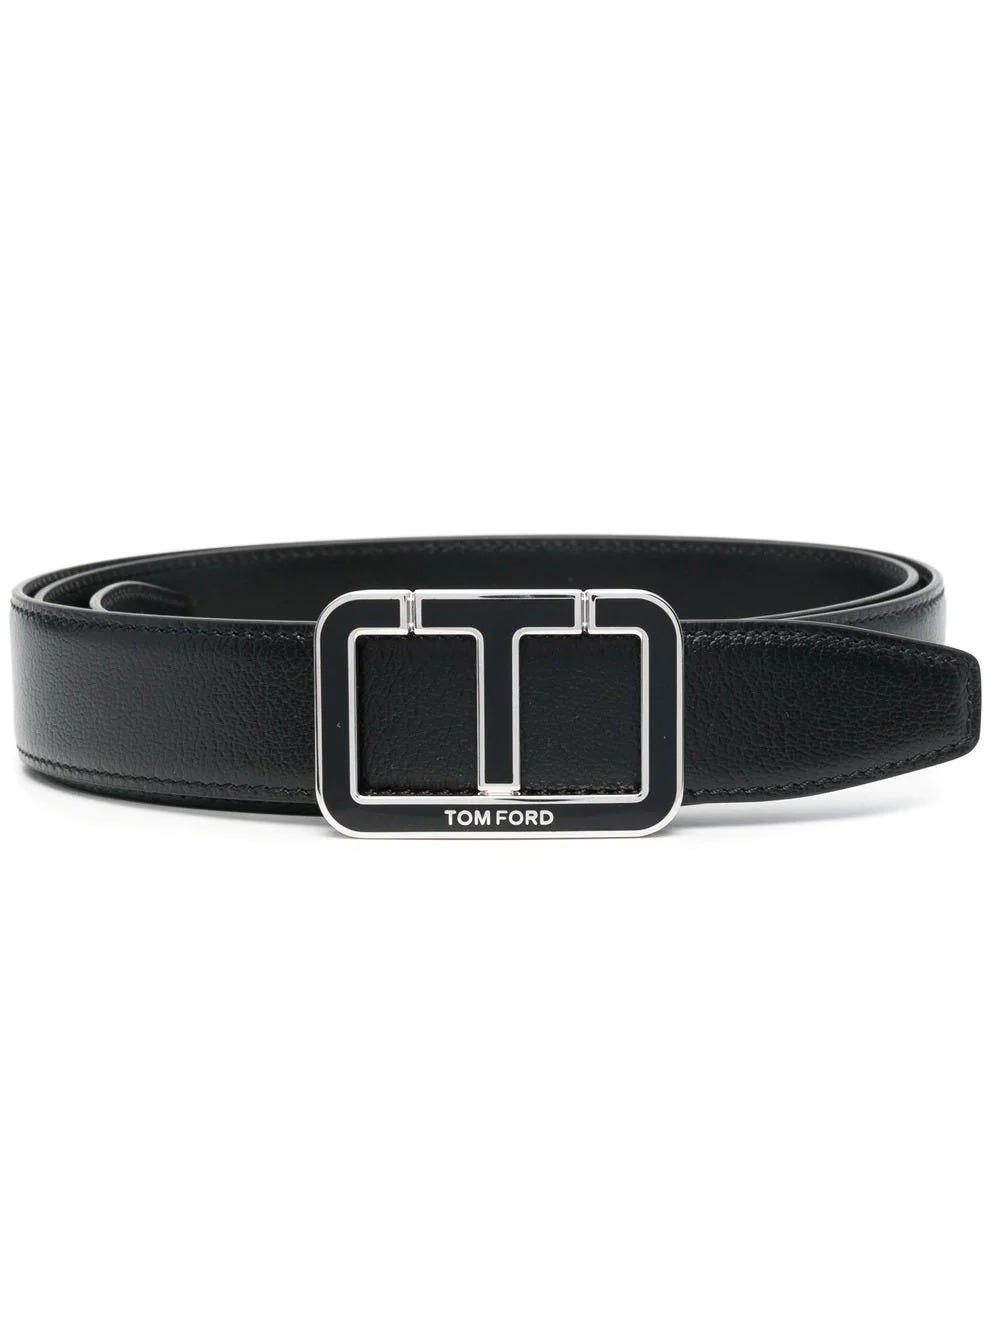 TOM FORD BELT WITH SQUARE BUCKLE